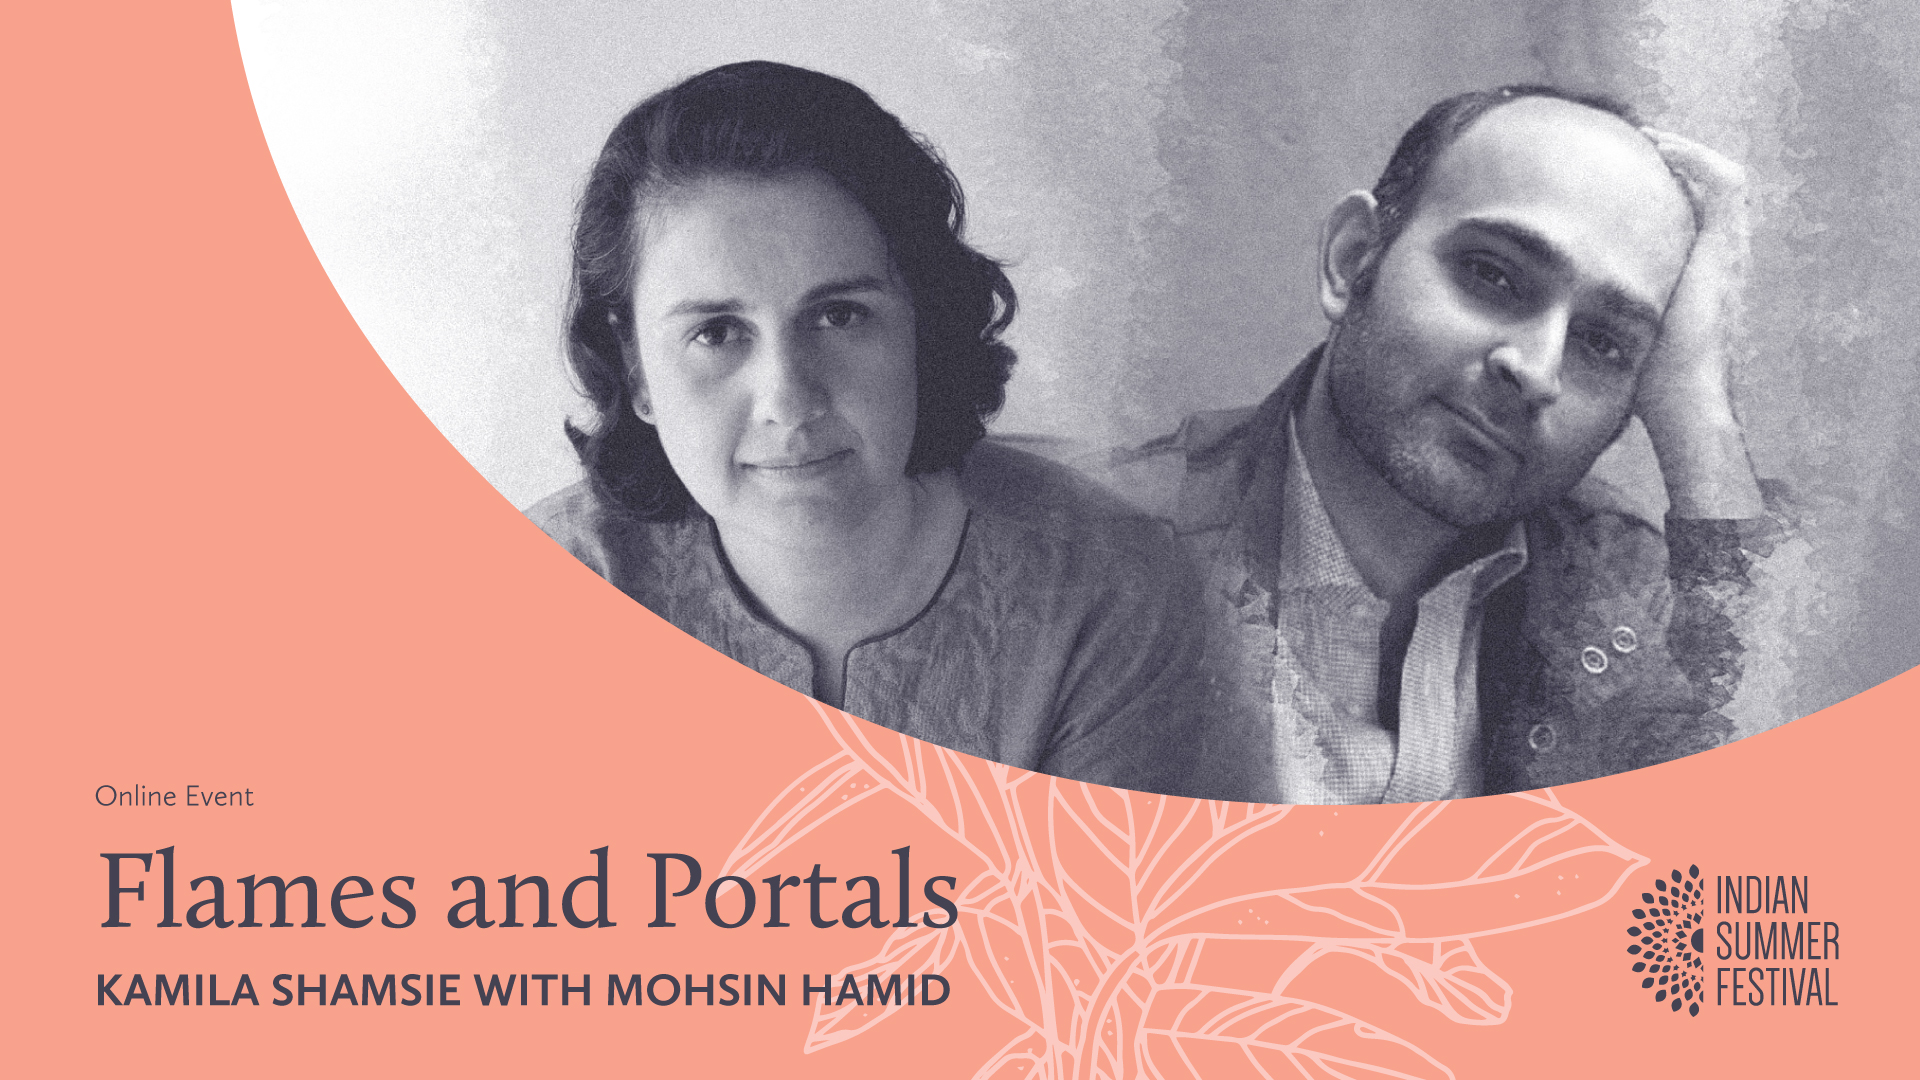 Online Event banner for Flames and Portals event featuring Kamila Shamsie and Mohsin Hamid.